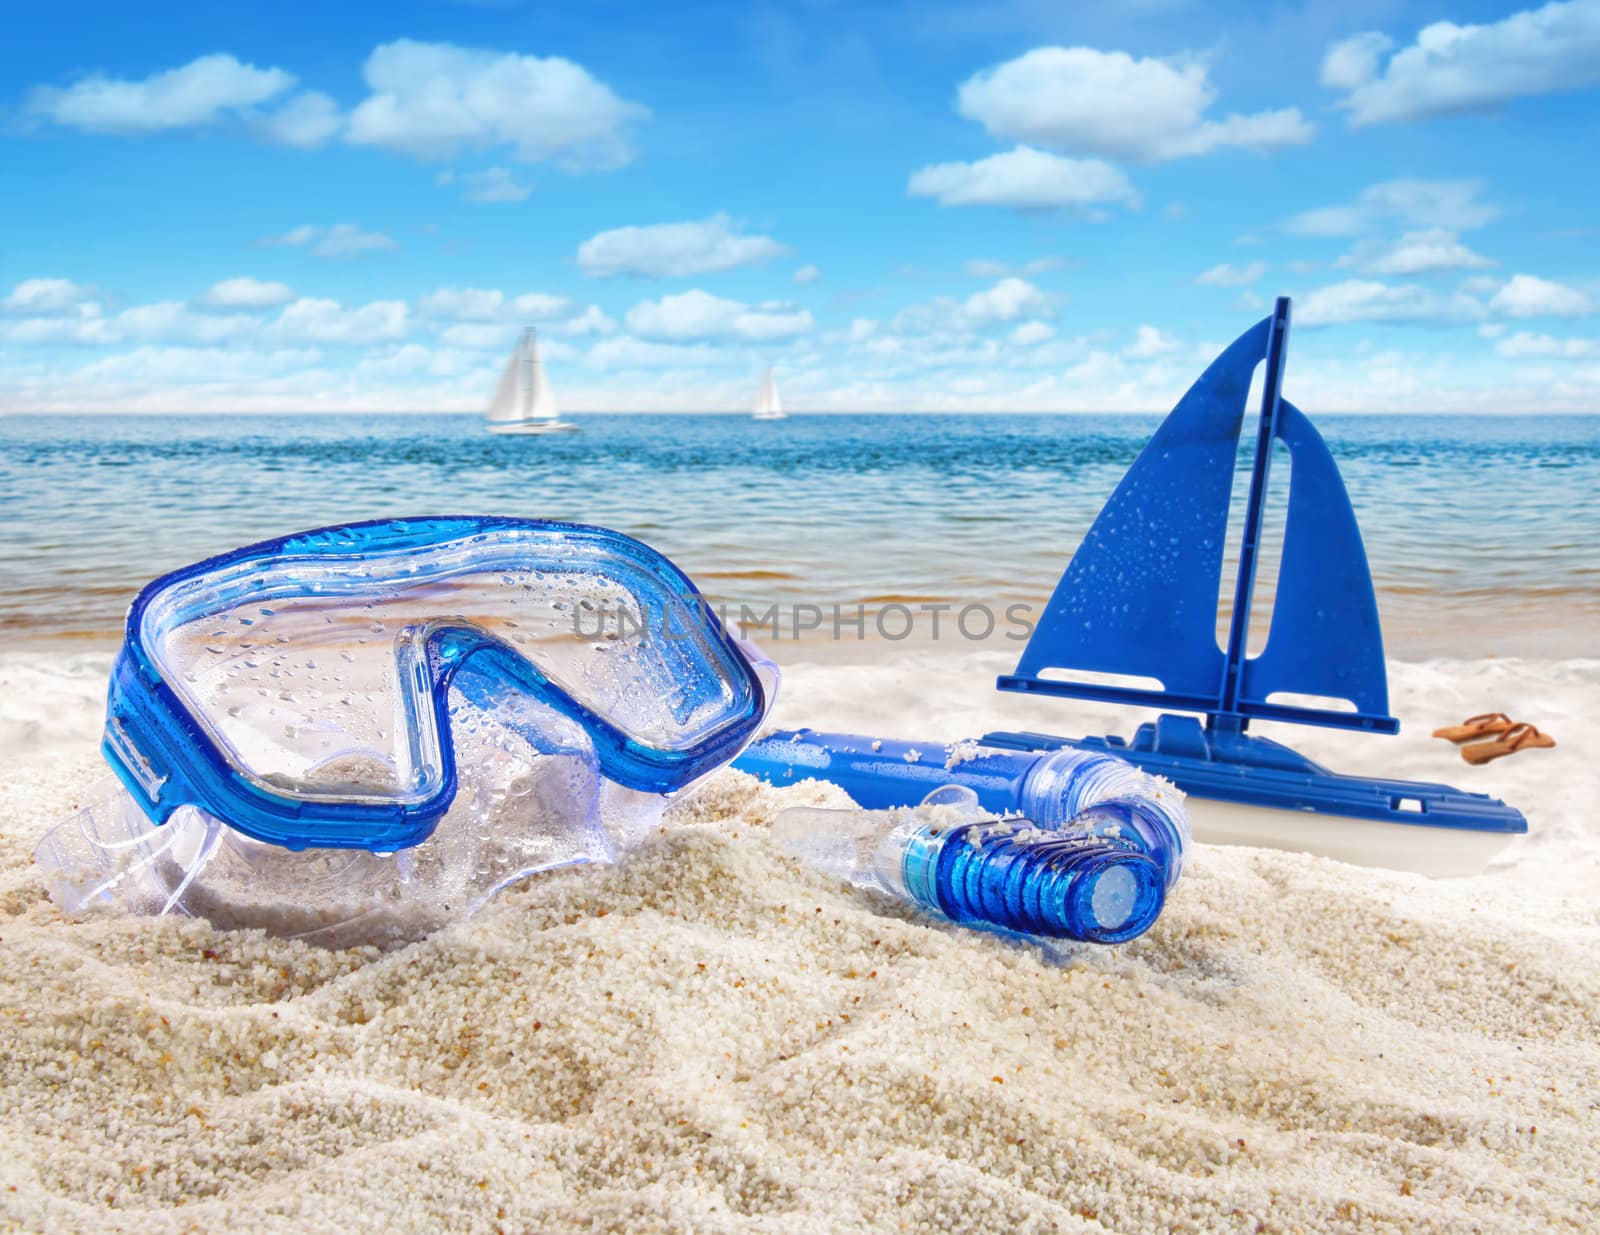 Goggles and toy sailboat in sand  by Sandralise